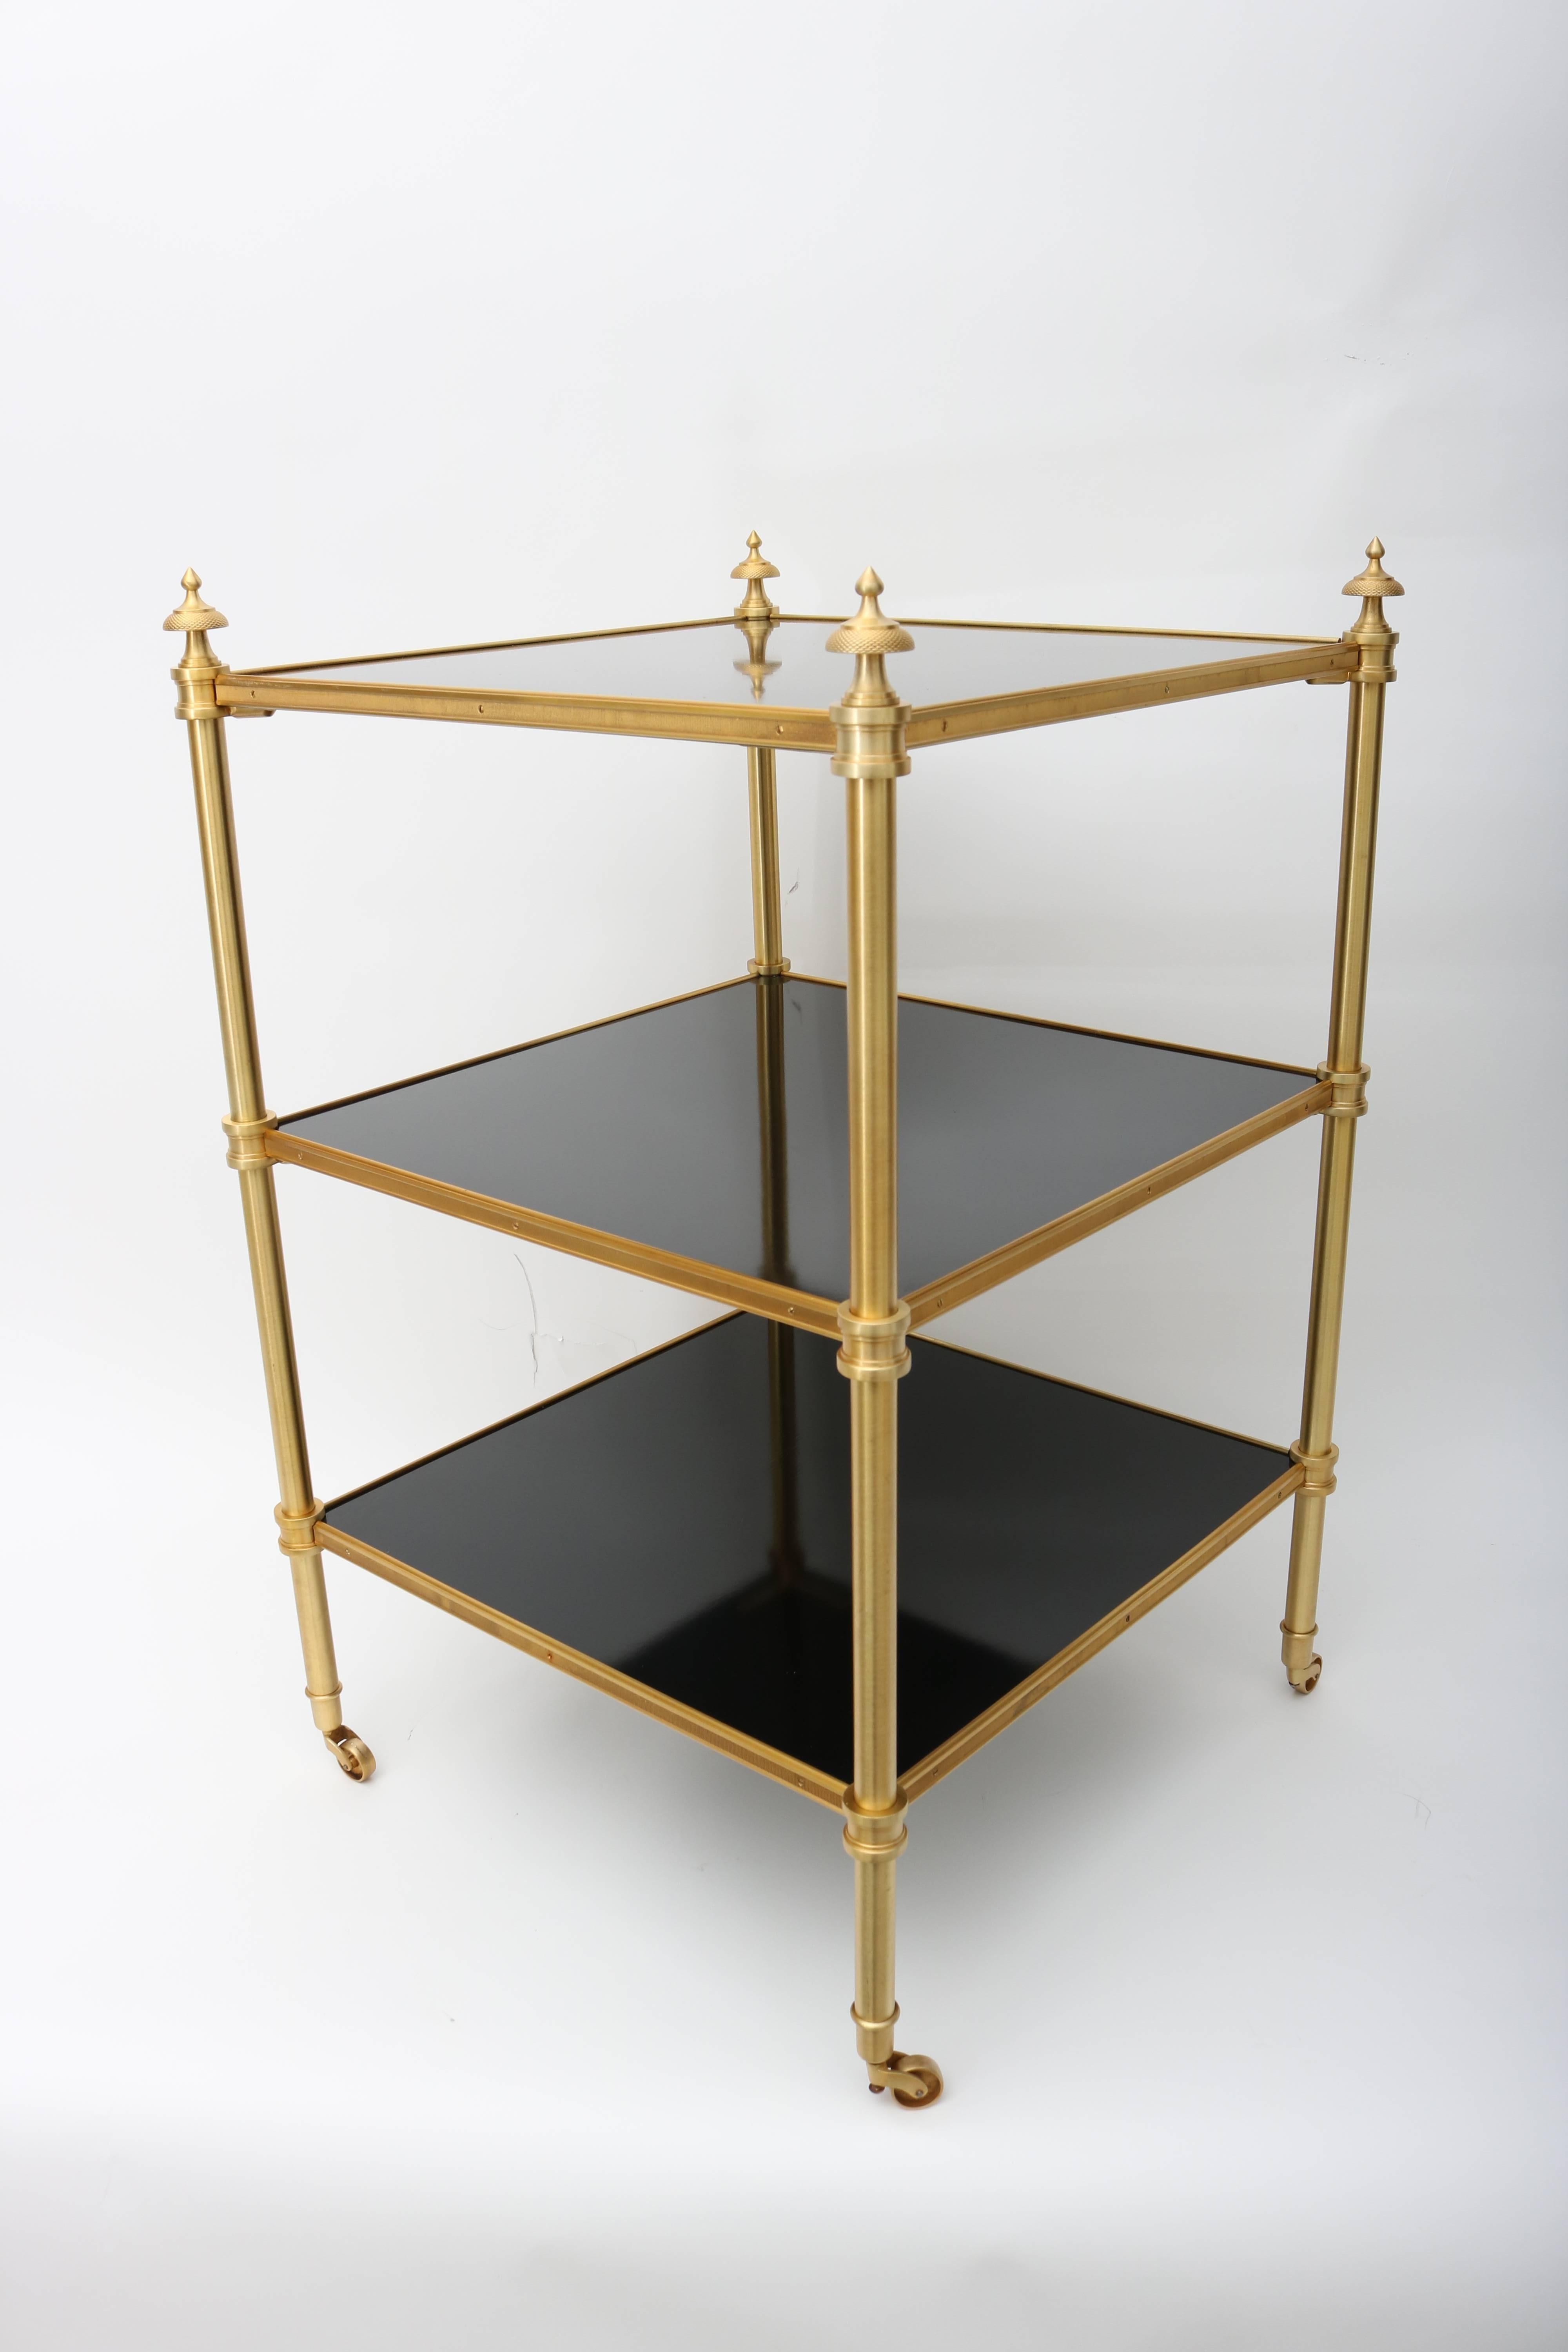 This stylish pair of Maison Jansen side tables were designed by Stephane Boudin and date to the 1950s-1960s.  They are cast brass with a gold wash finish and inset (recently restored) black lacquered panels.  The caster glide with